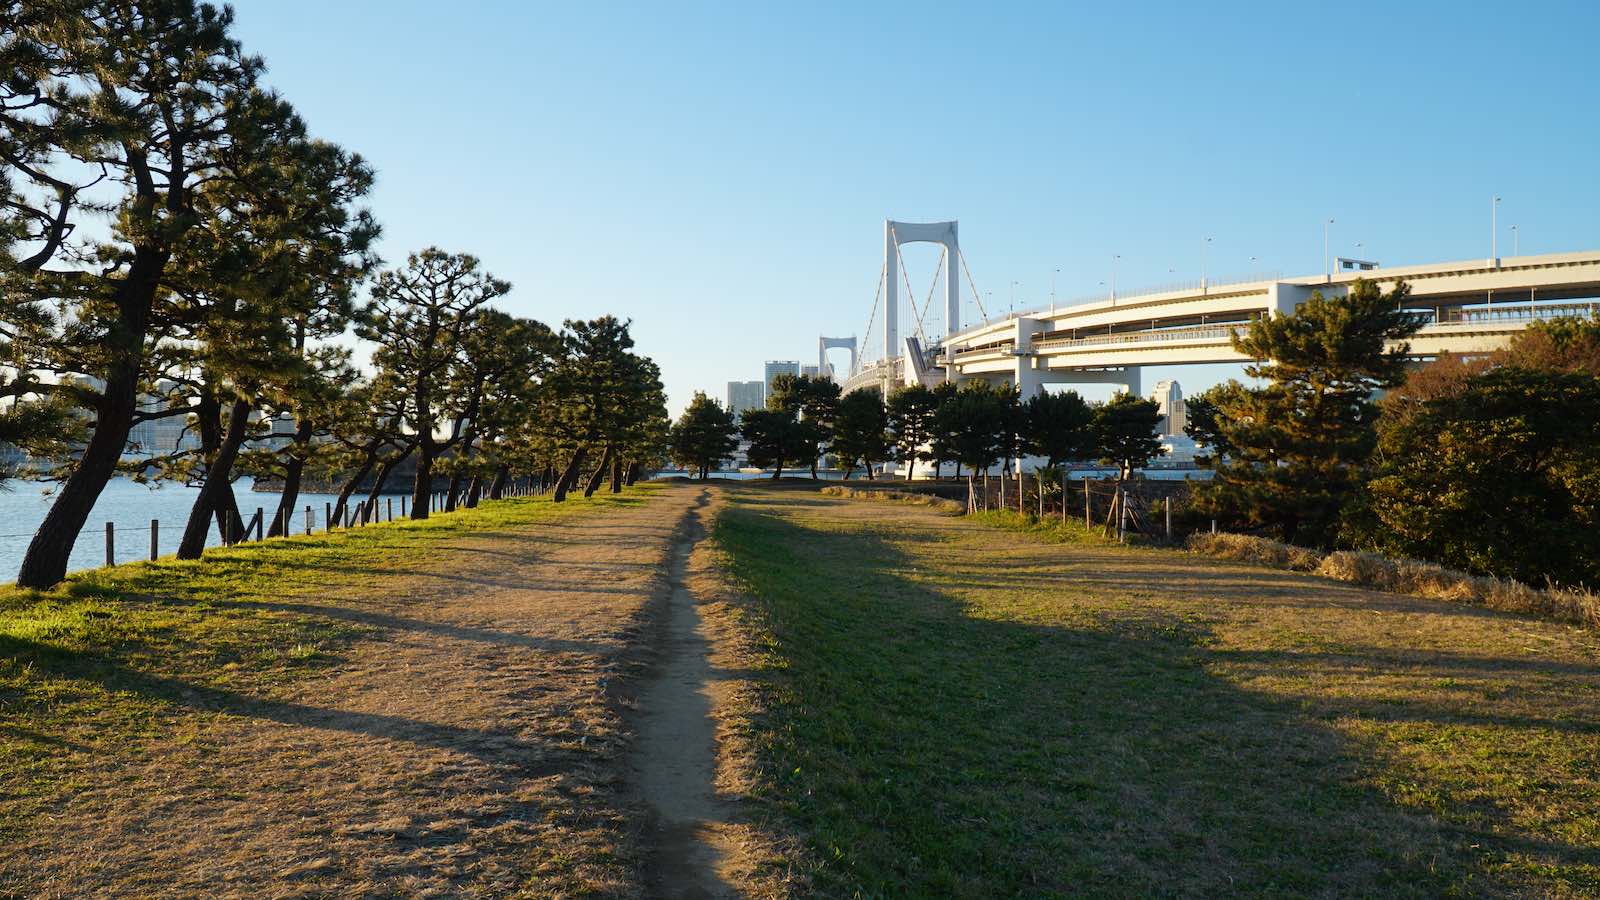 Got to Daiba Park and it felt like a completely different world. It's hard to believe that this peaceful and empty park is in the middle of one of the most populated cities in the world, and that an hour ago I was in the middle of the chaotically packed Comiket.